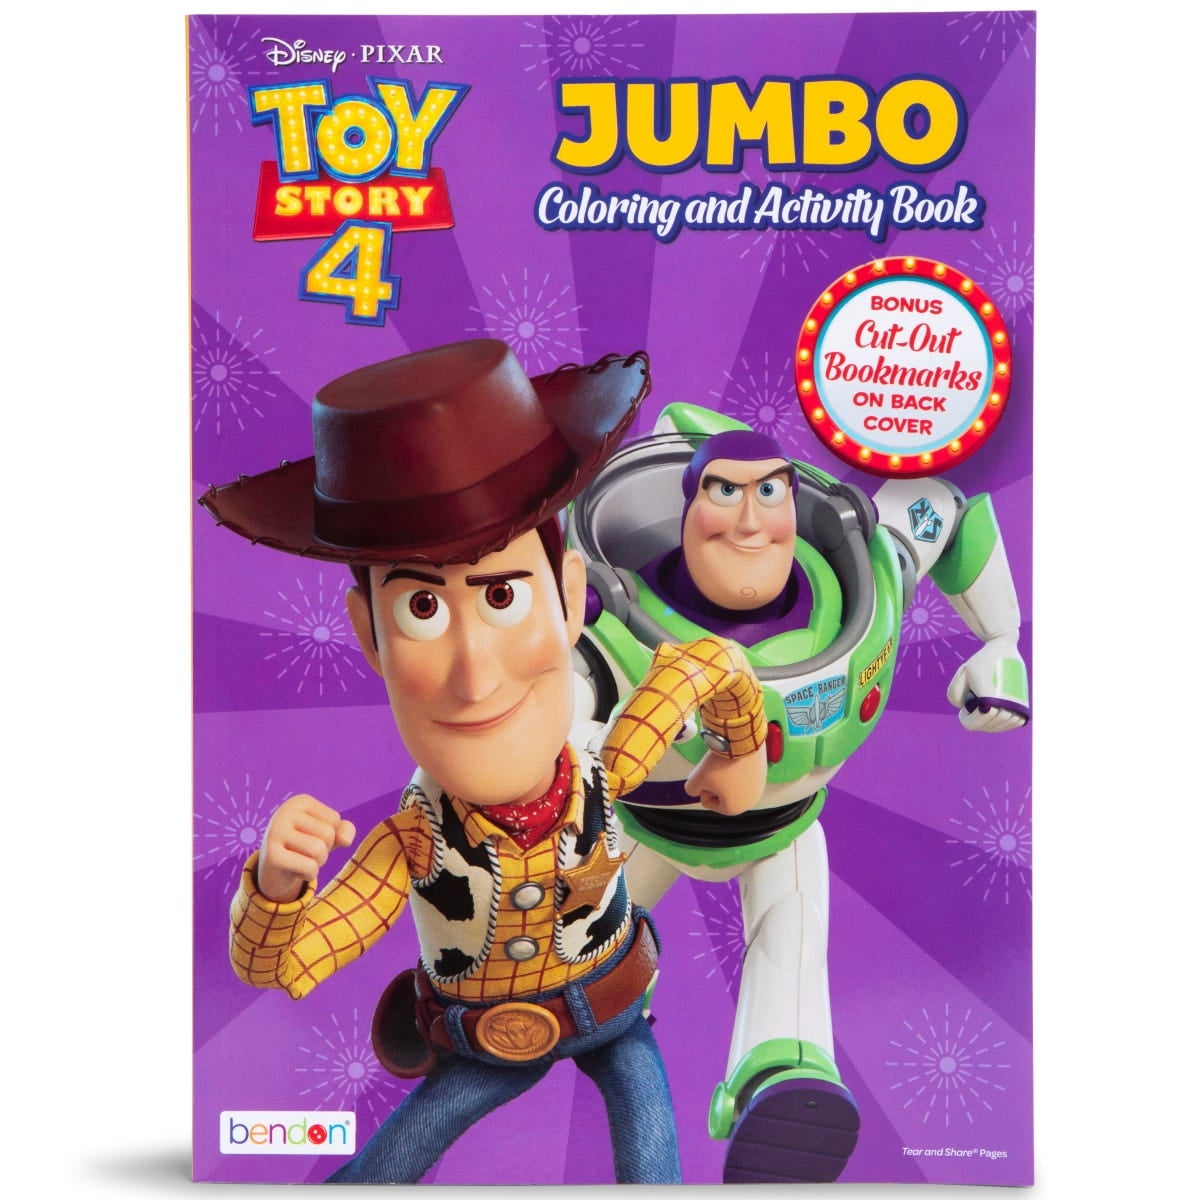 Toy Story 4 Jumbo Coloring And Activity Book